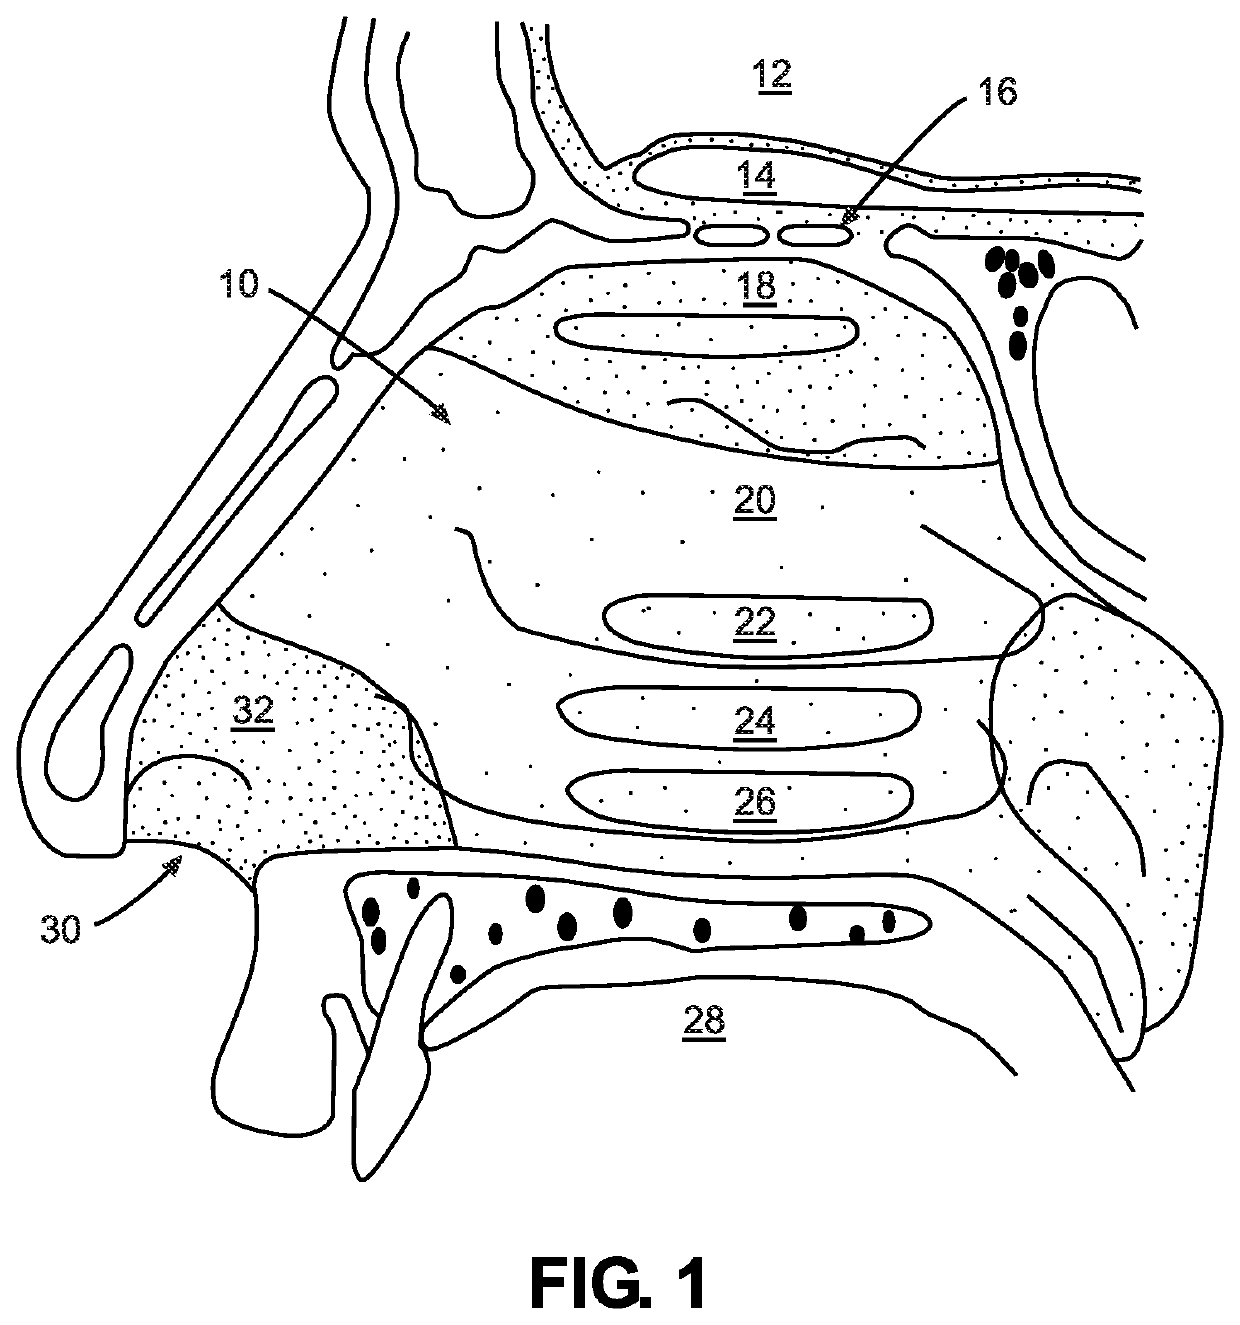 Venting of pharmaceutical drug delivery device for air flow and humidity control